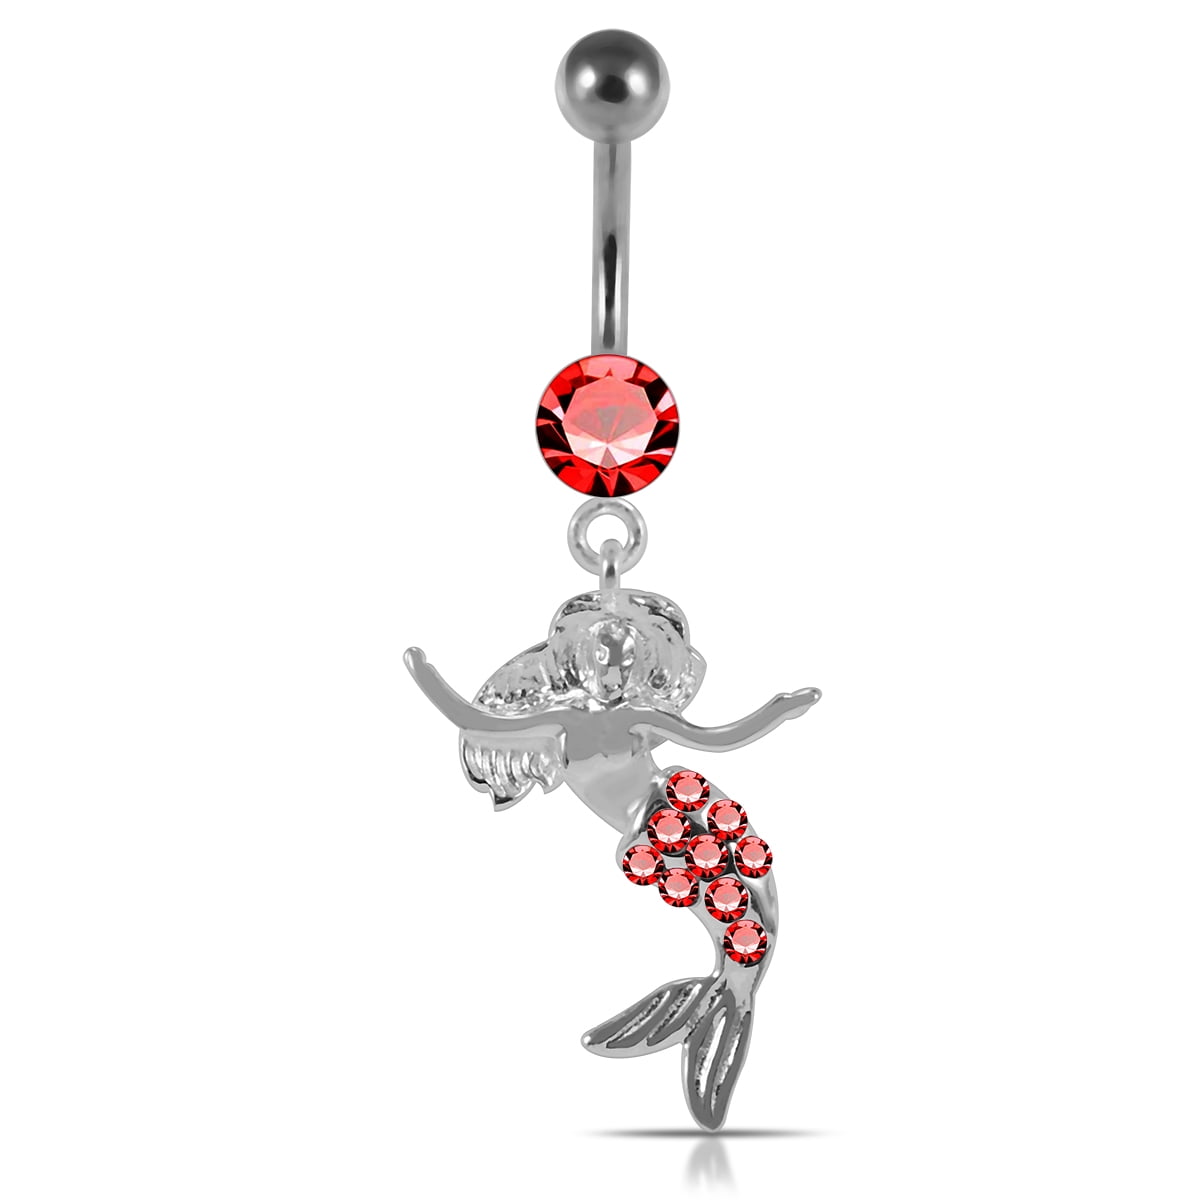 PRETTY REAL SOLID STERLING SILVER DANGLE 316L STEEL BELLY NAVEL RING 14 GAUGE 